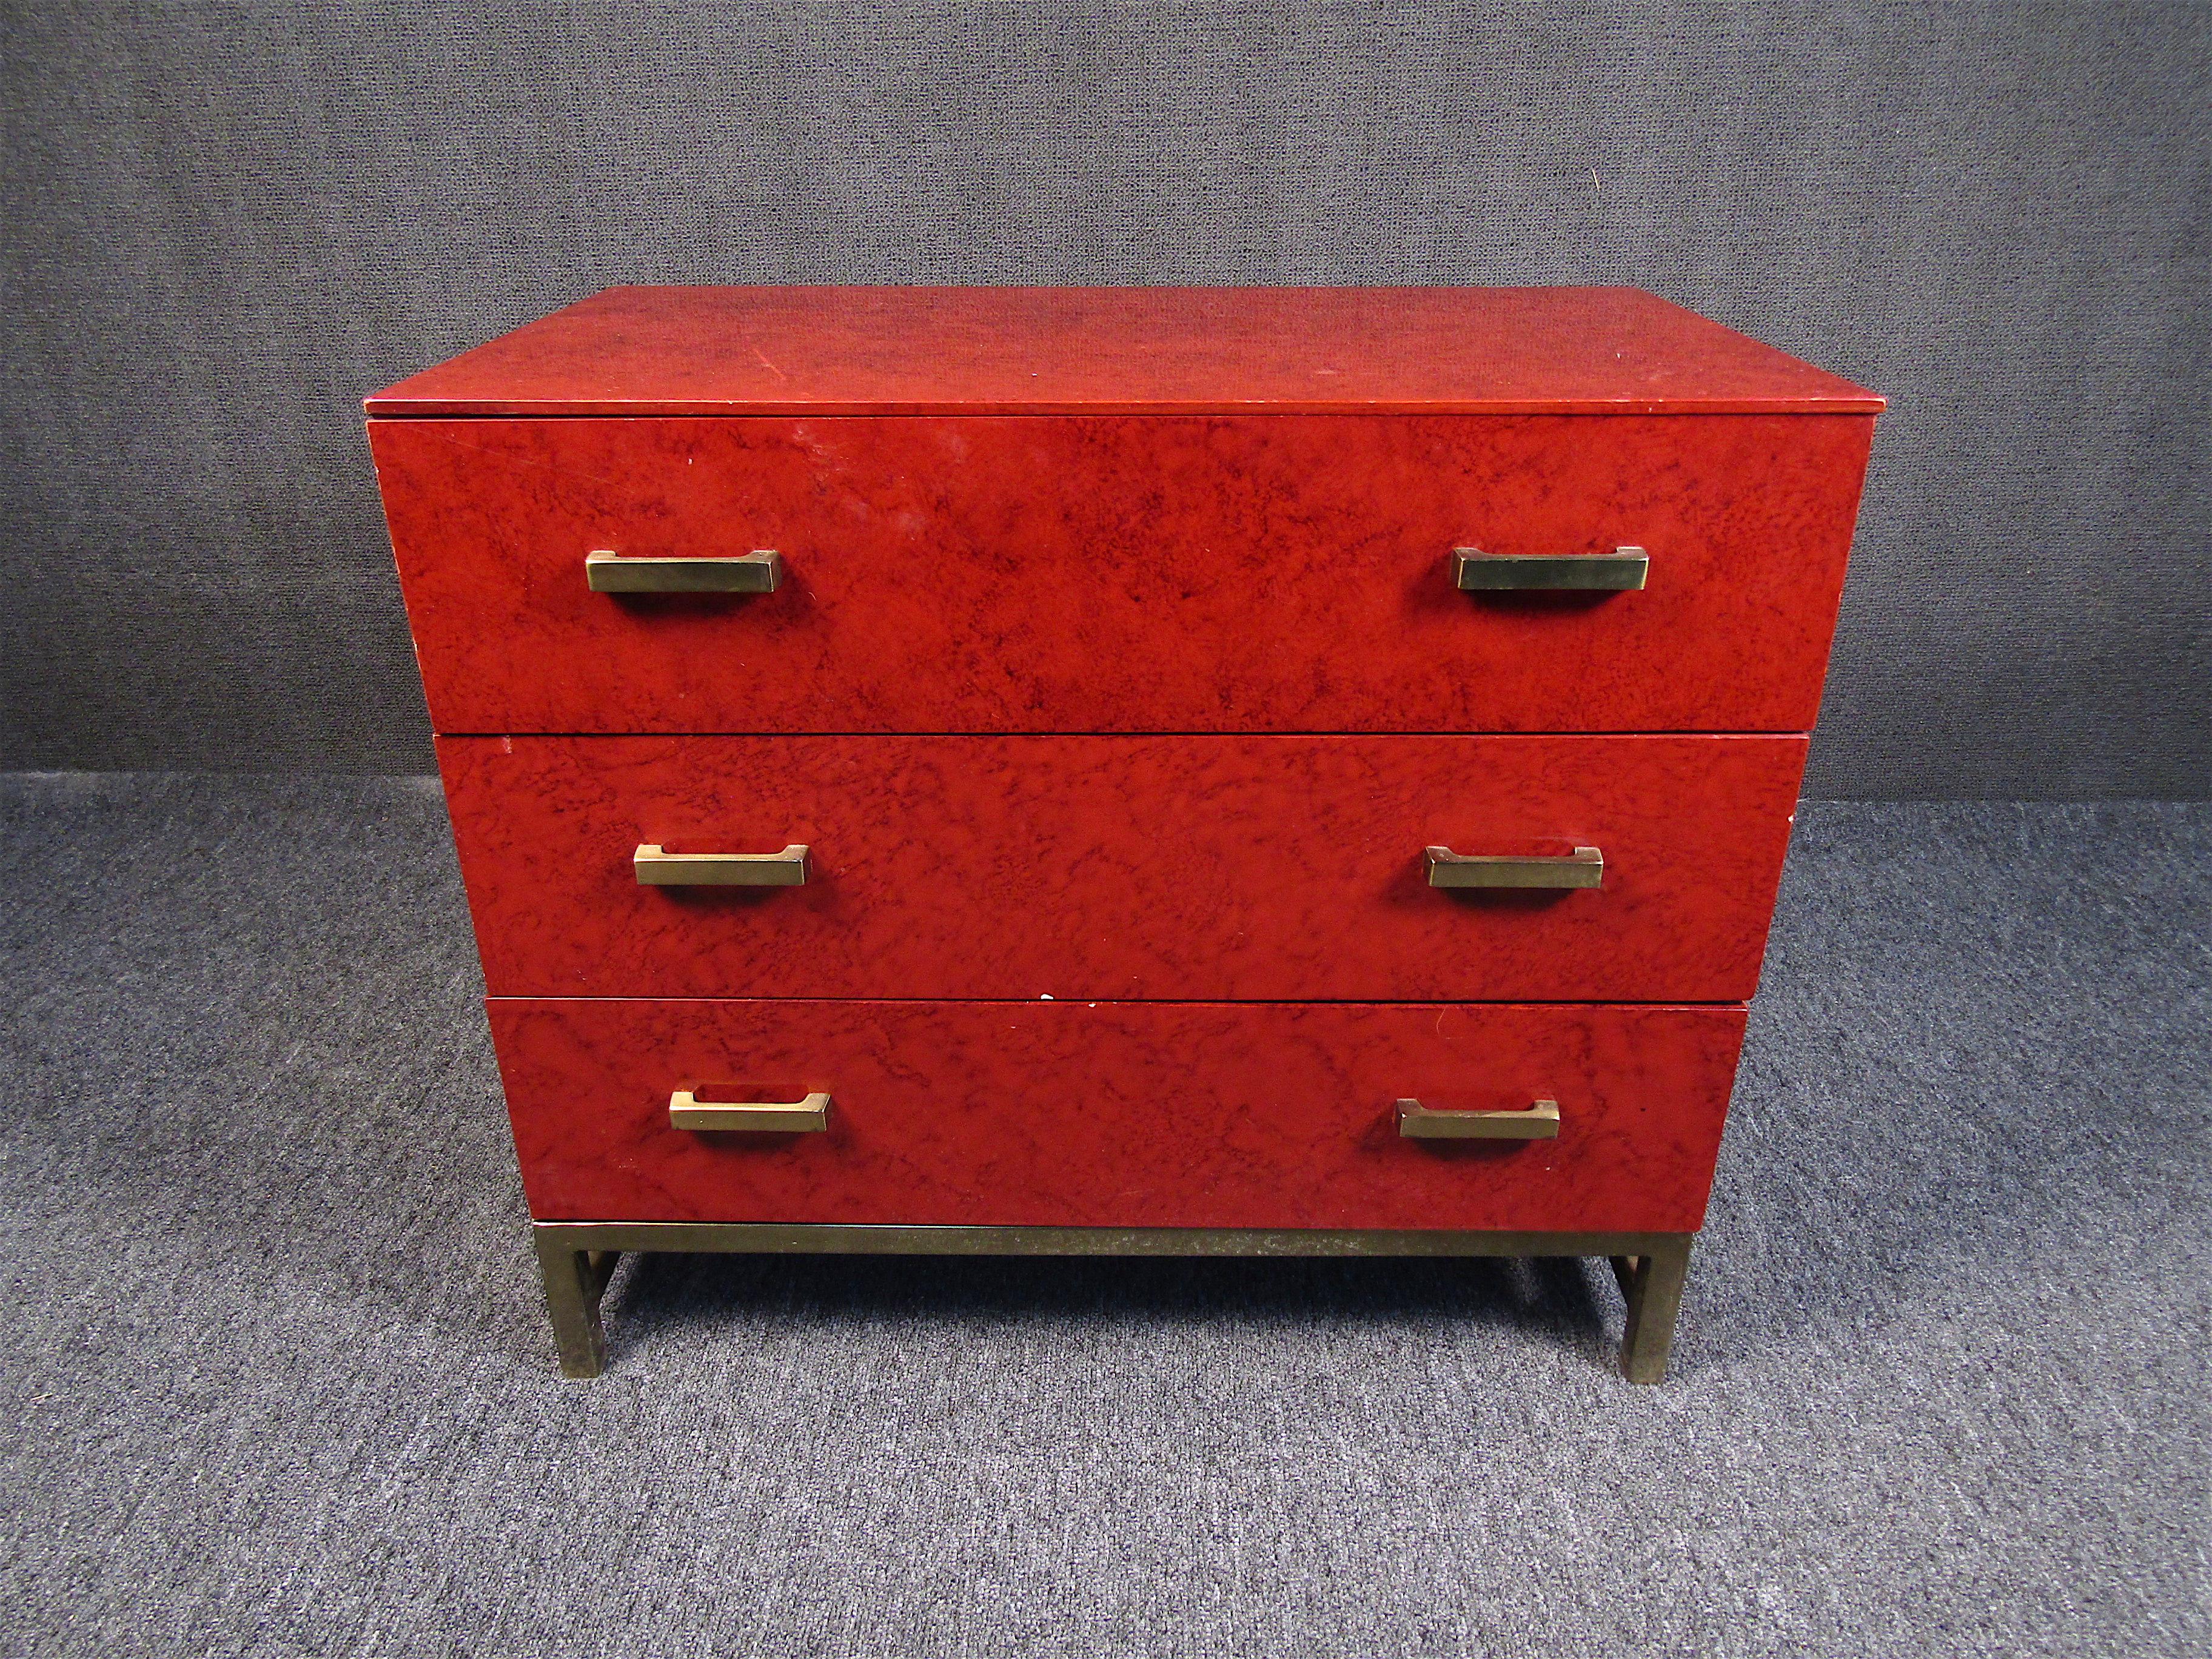 Unusual midcentury piece manufactured by Lane Furniture Co. Deep red finish with brass accents. Please confirm item location with dealer (NJ or NY).